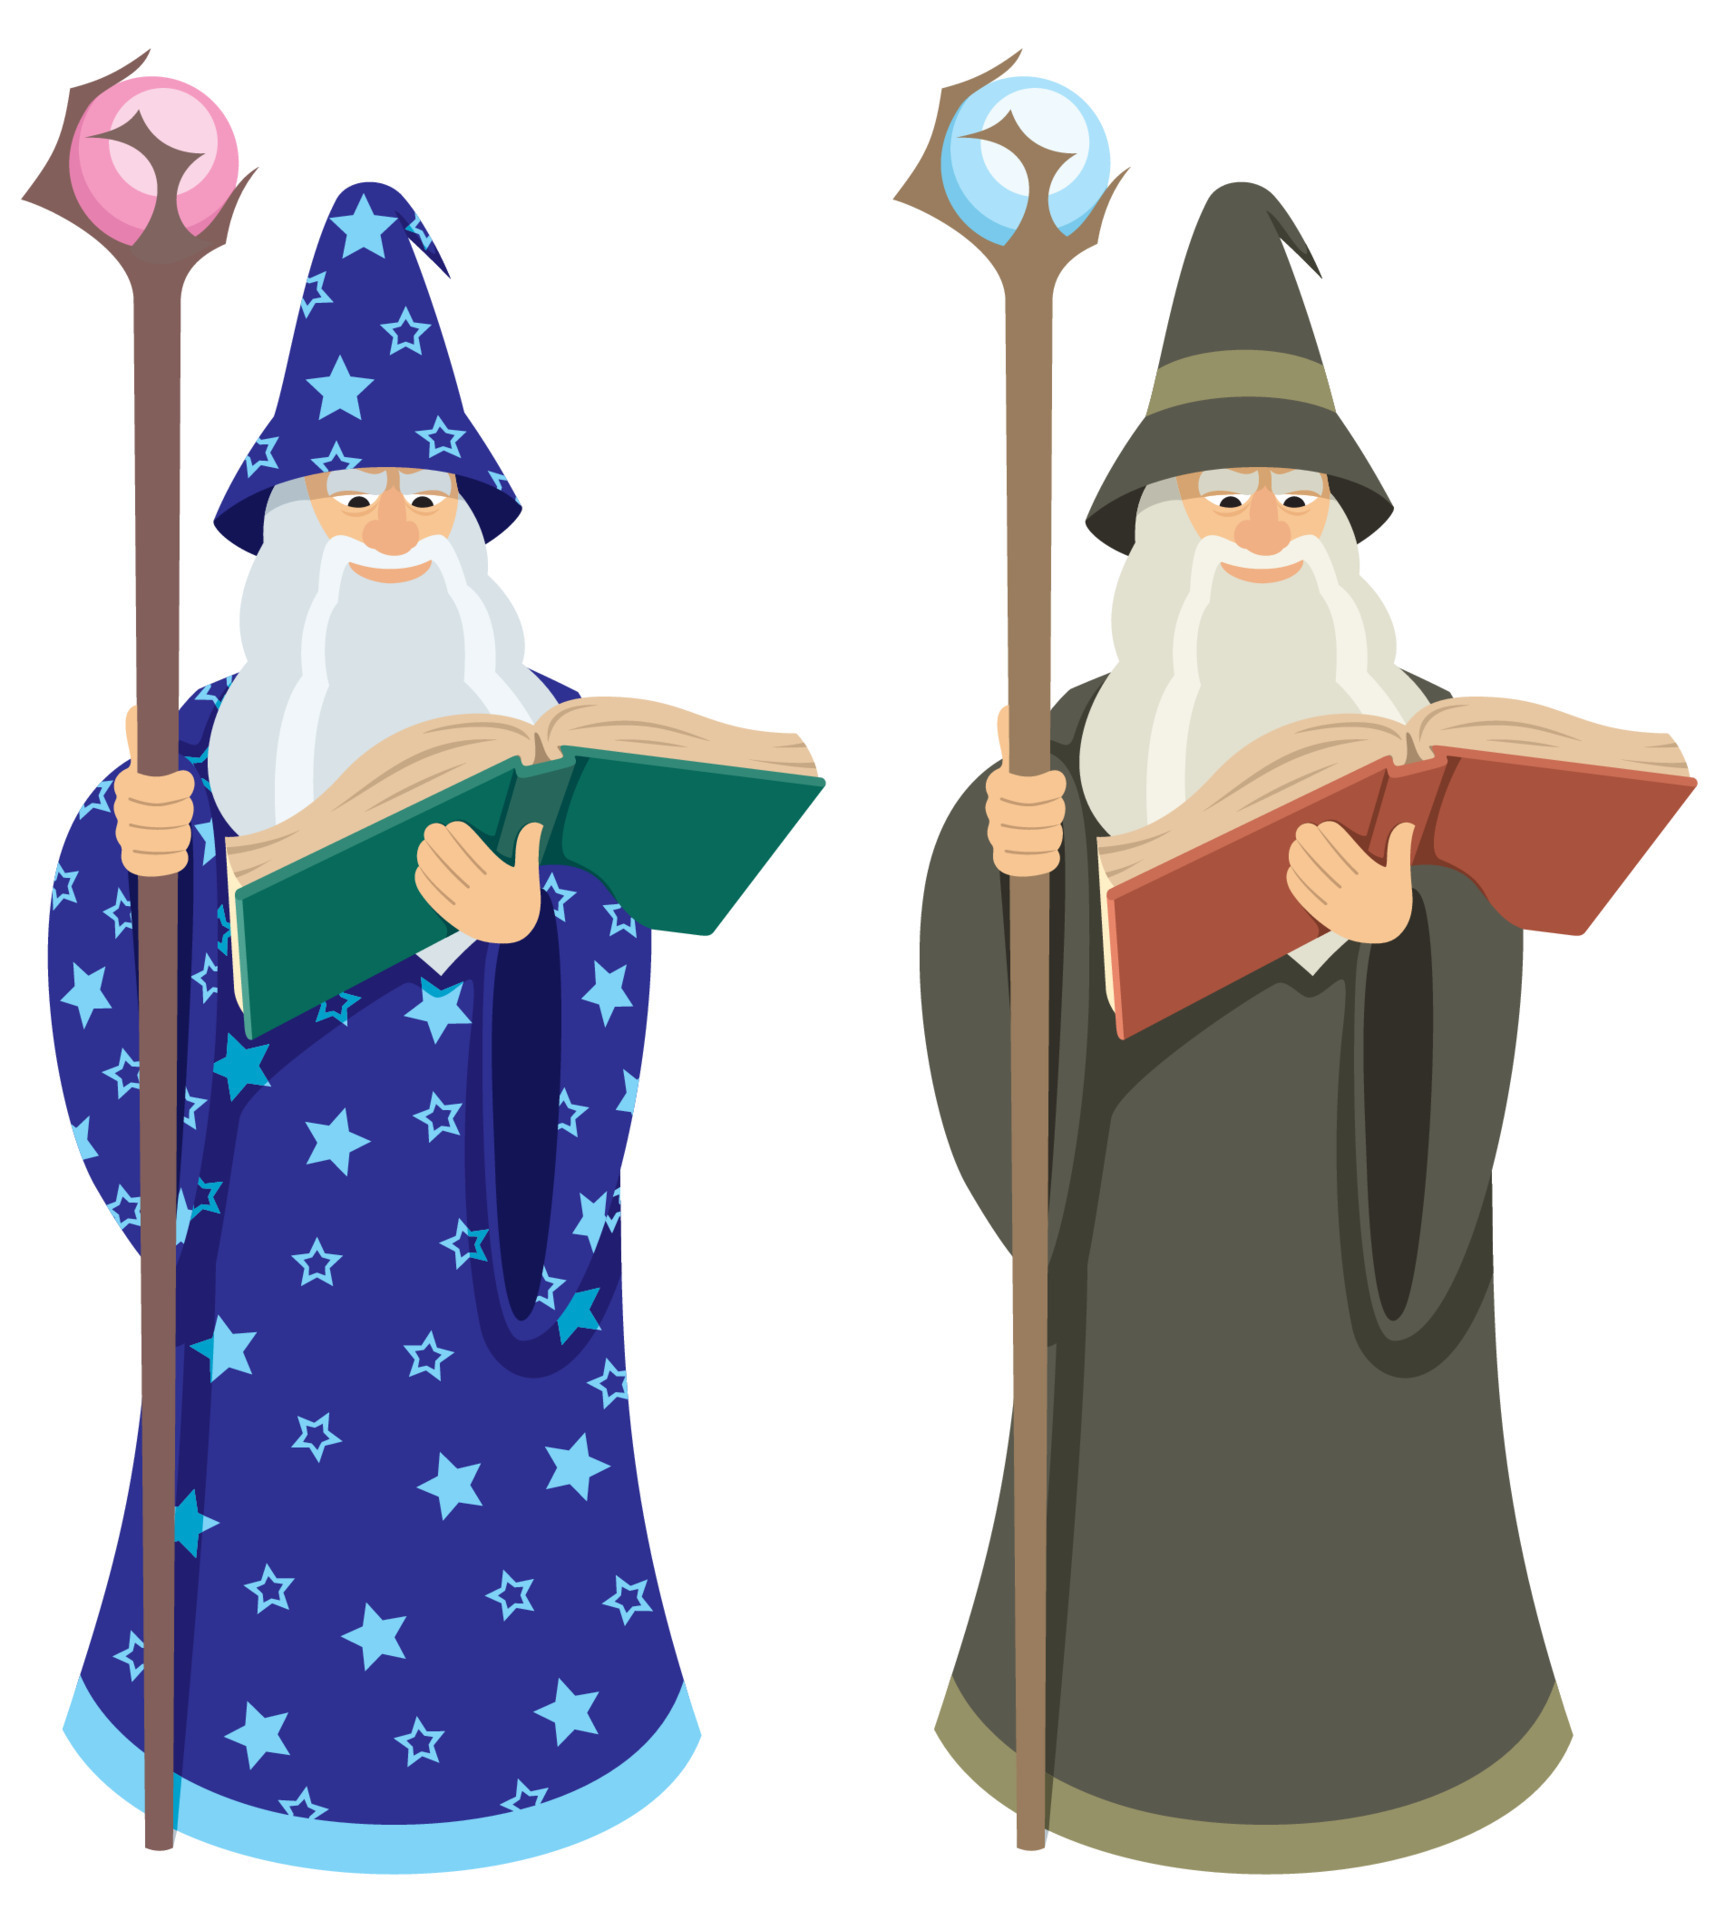 Merlin Vector Art, Icons, and Graphics for Free Download